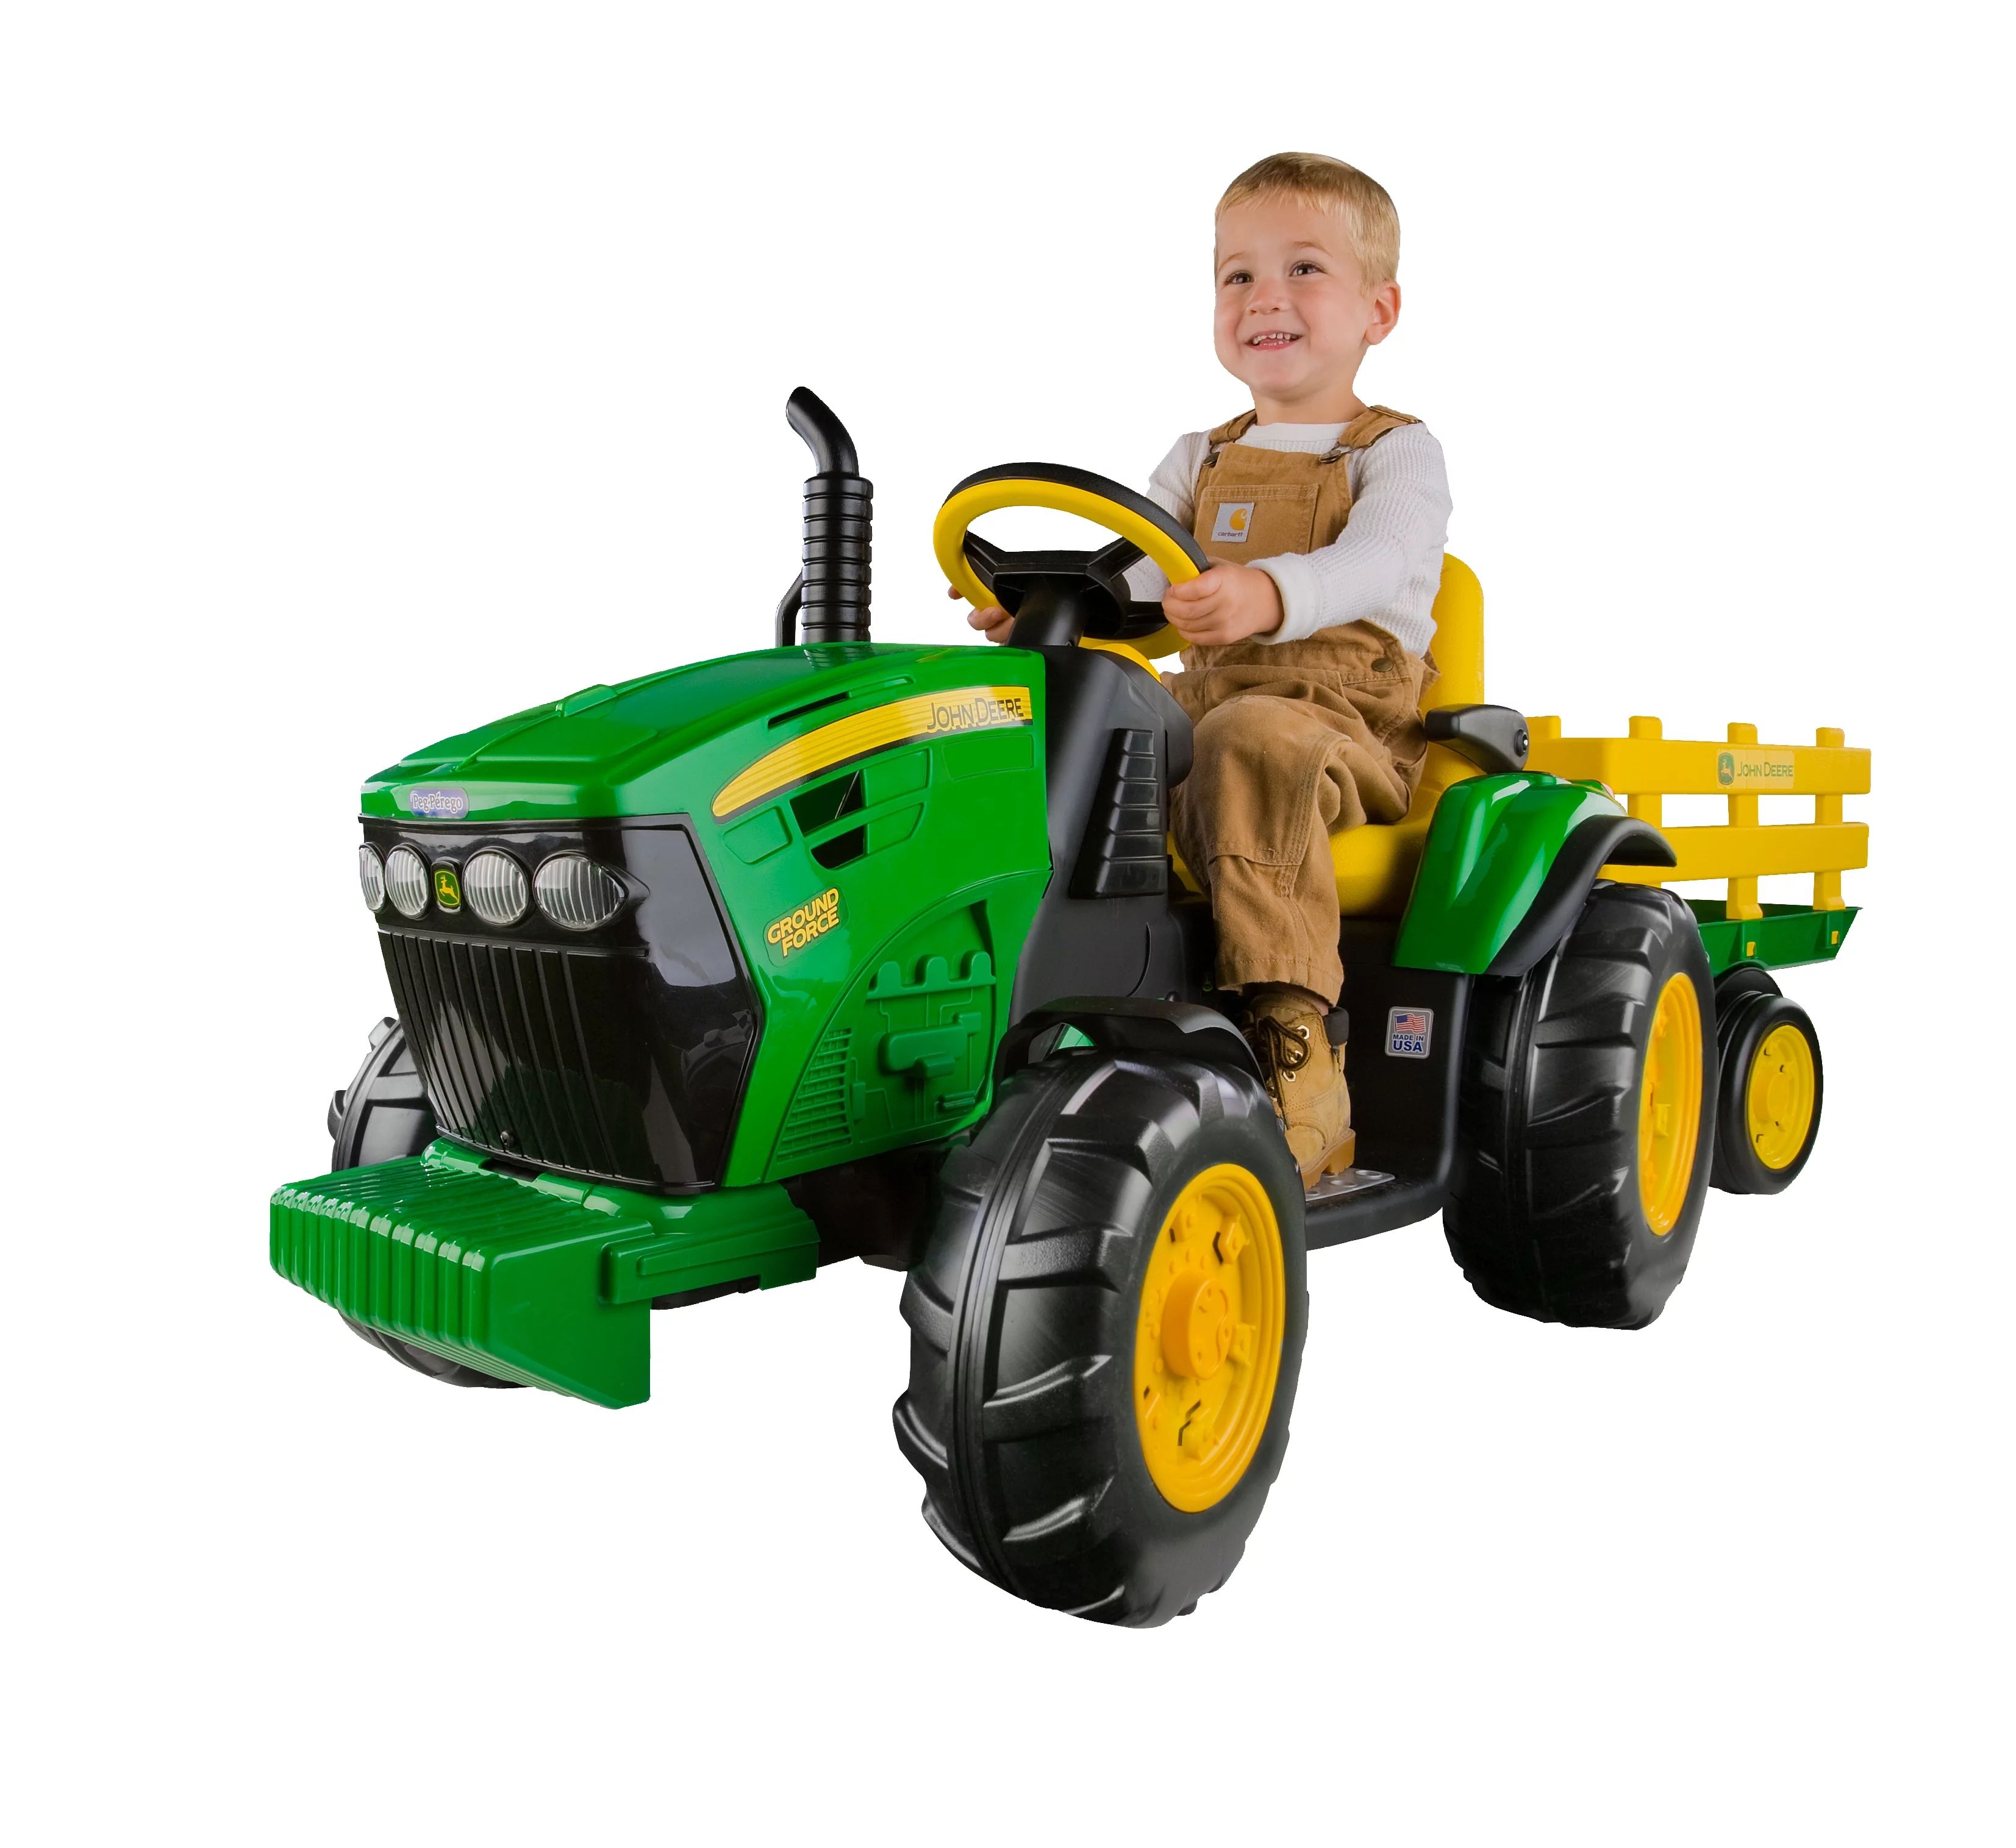 12V Peg Perego John Deere Ground Force Tractor Ride-on, for a Child Ages 3-7 | Walmart (US)